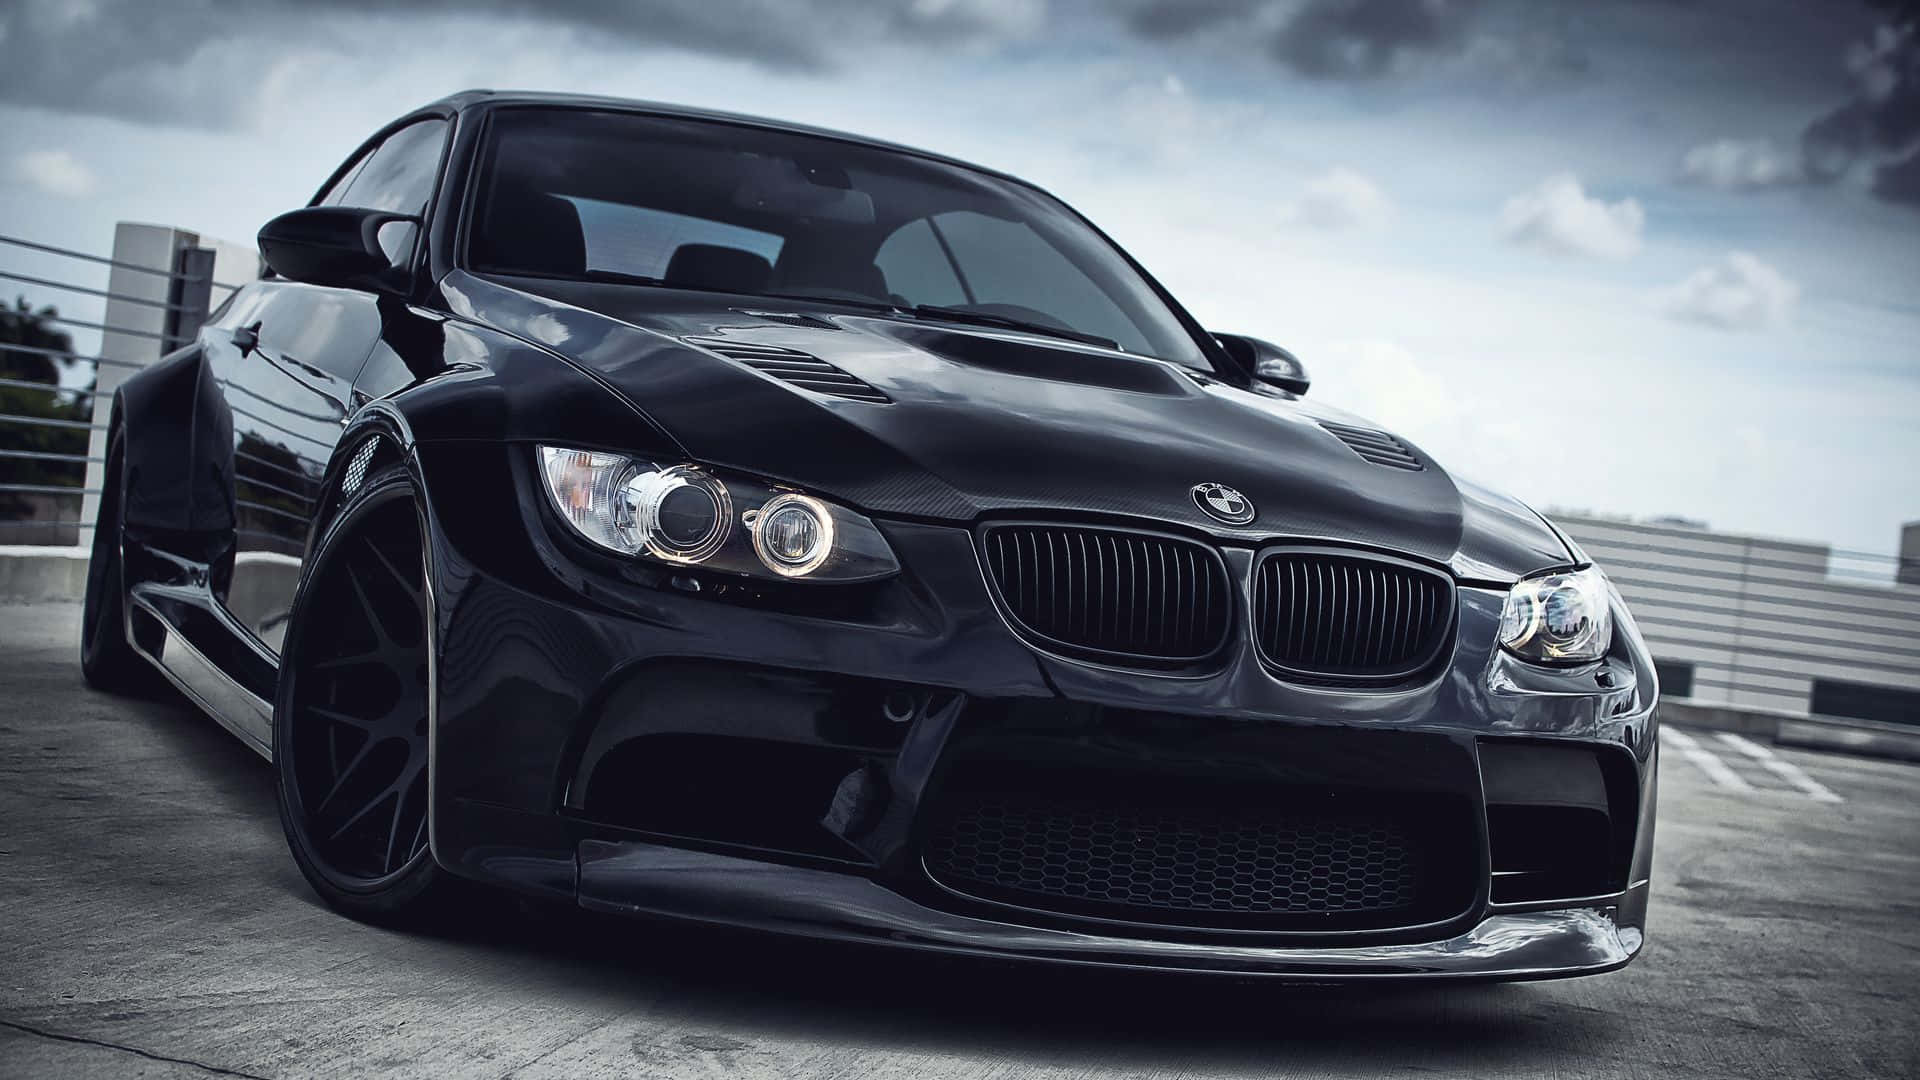 Cruise in Luxury with a BMW Car Wallpaper